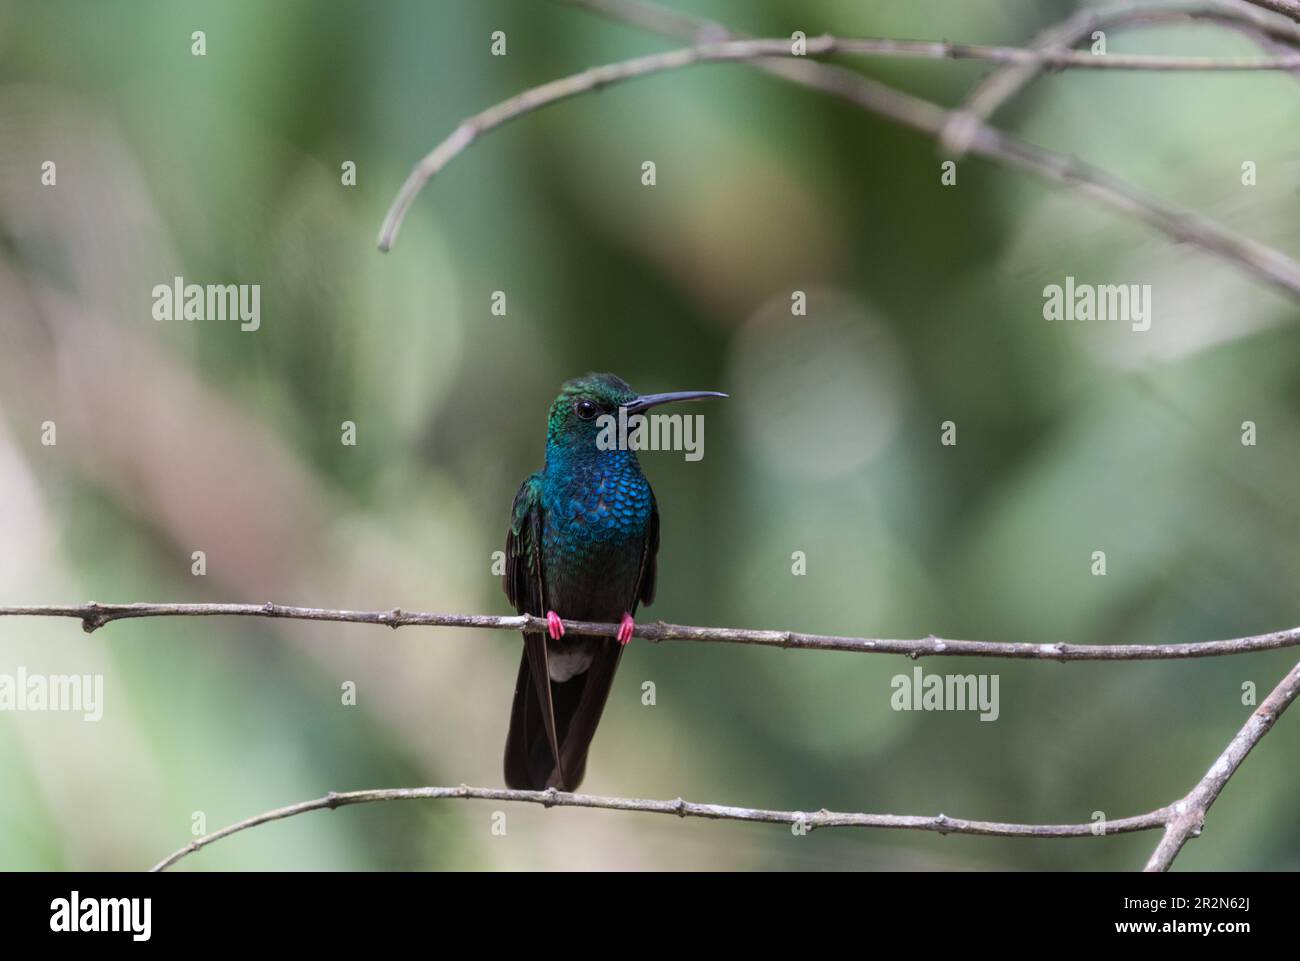 A perched Bronze-tailed Plumeleteer (Chalybura urochrysia), a hummingbird, in Panama Stock Photo